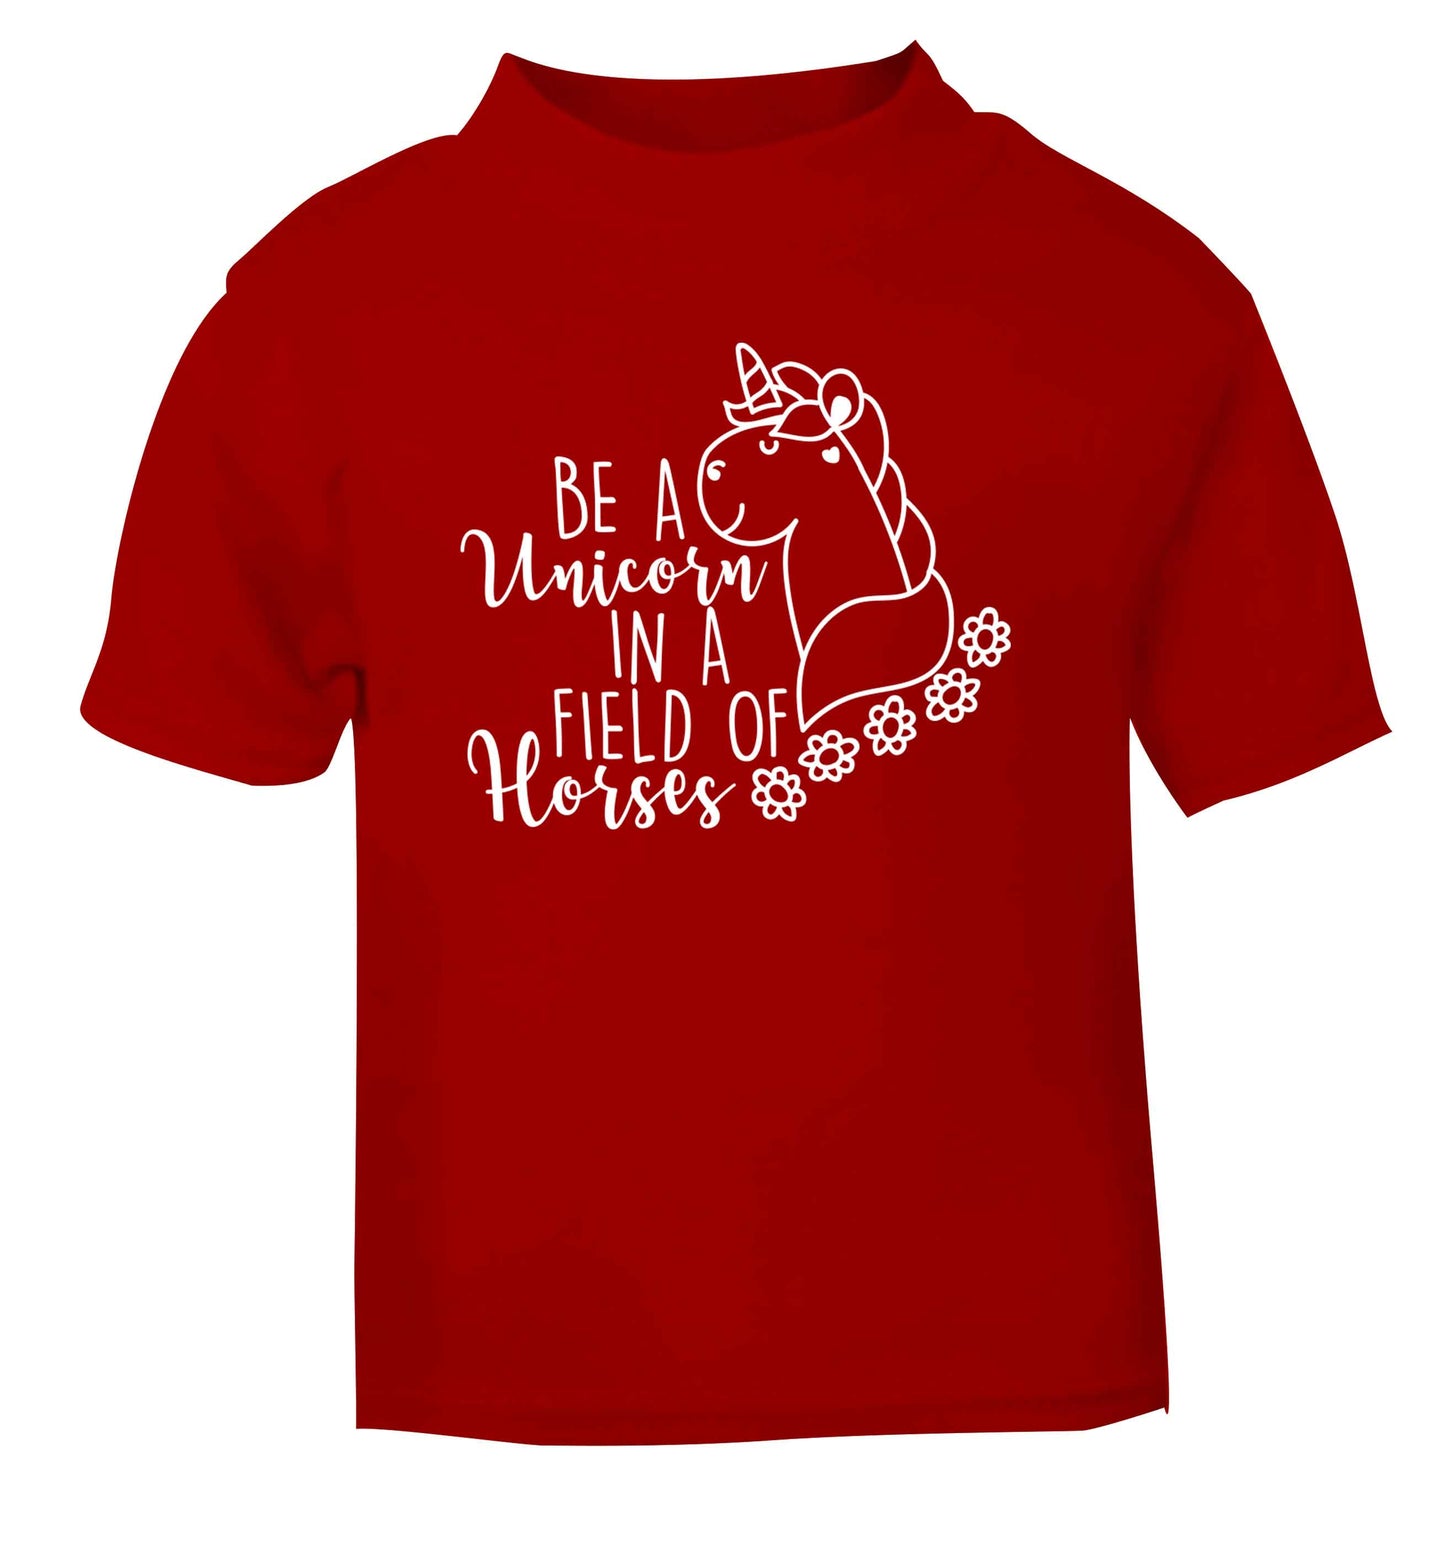 Be a unicorn in a field of horses red Baby Toddler Tshirt 2 Years